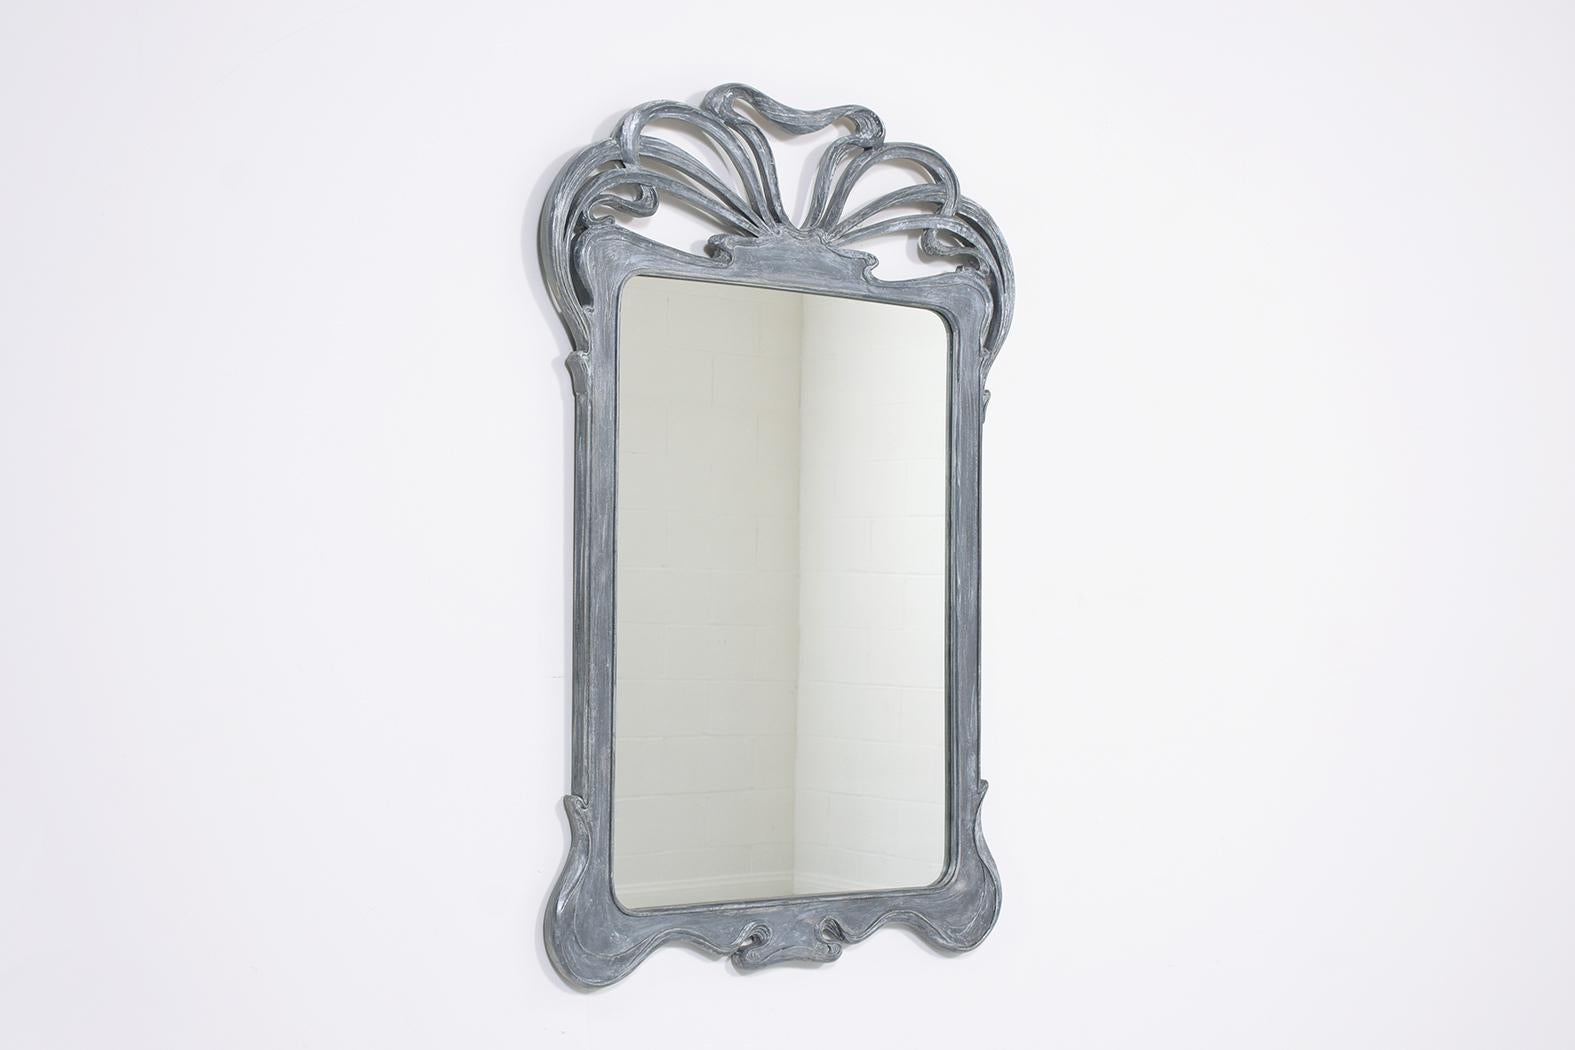 This extraordinary vintage art deco-style wall mirror is in excellent condition crafted out of mahogany wood and has been fully restored by our team of expert craftsmen. This fabulous mirror is the perfect addition to the displayed or compliments a